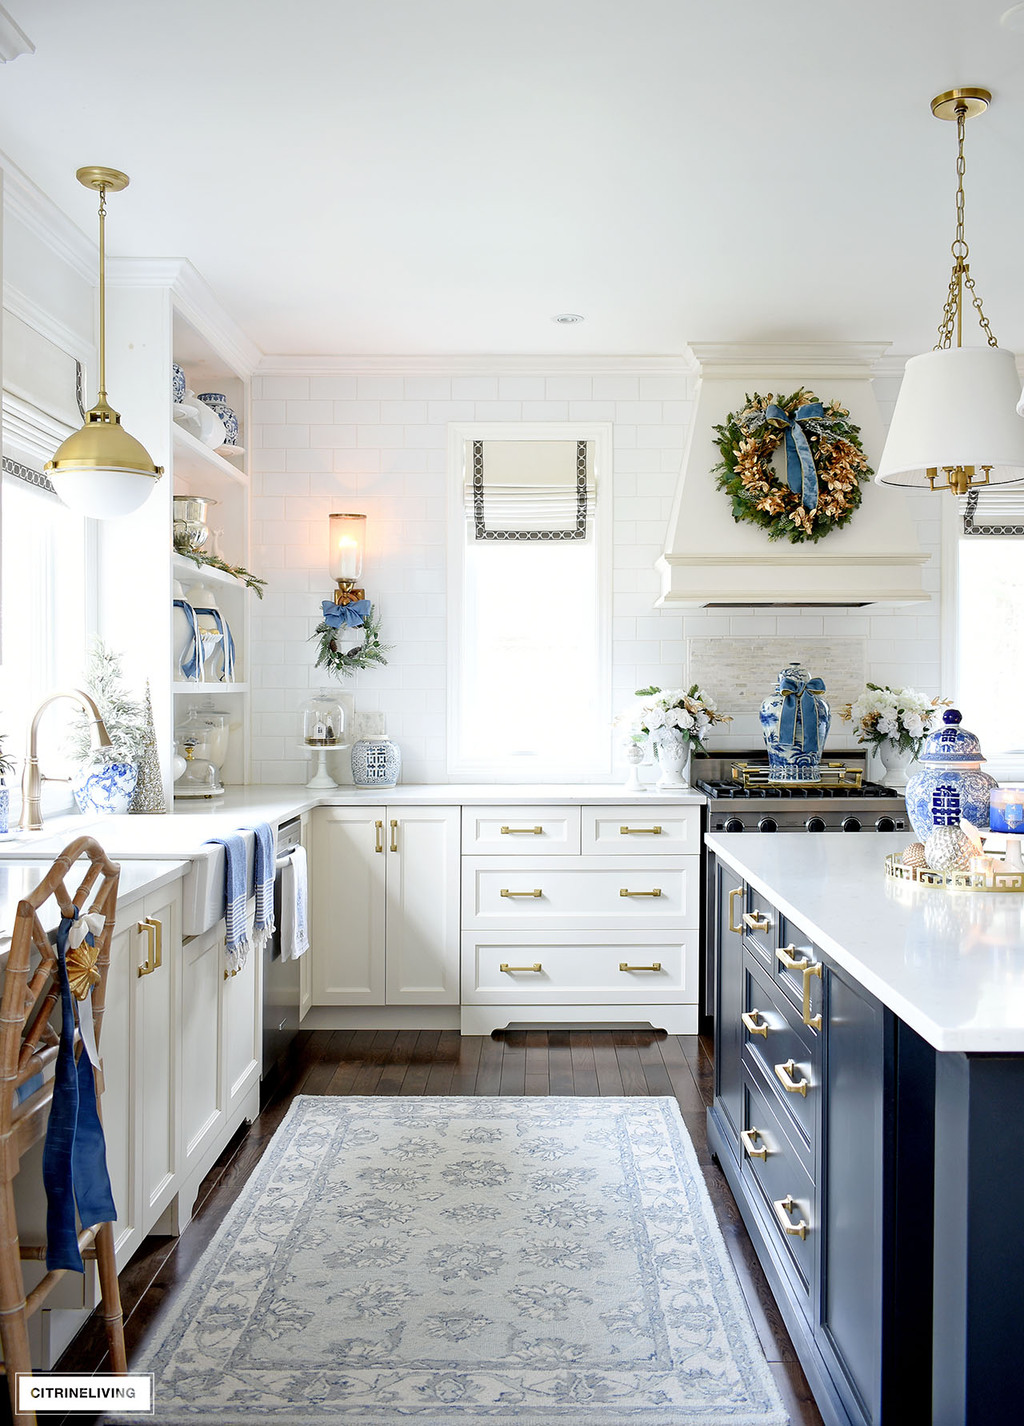 Kitchen decorated for Christmas with blue, white and gold and green wreaths.